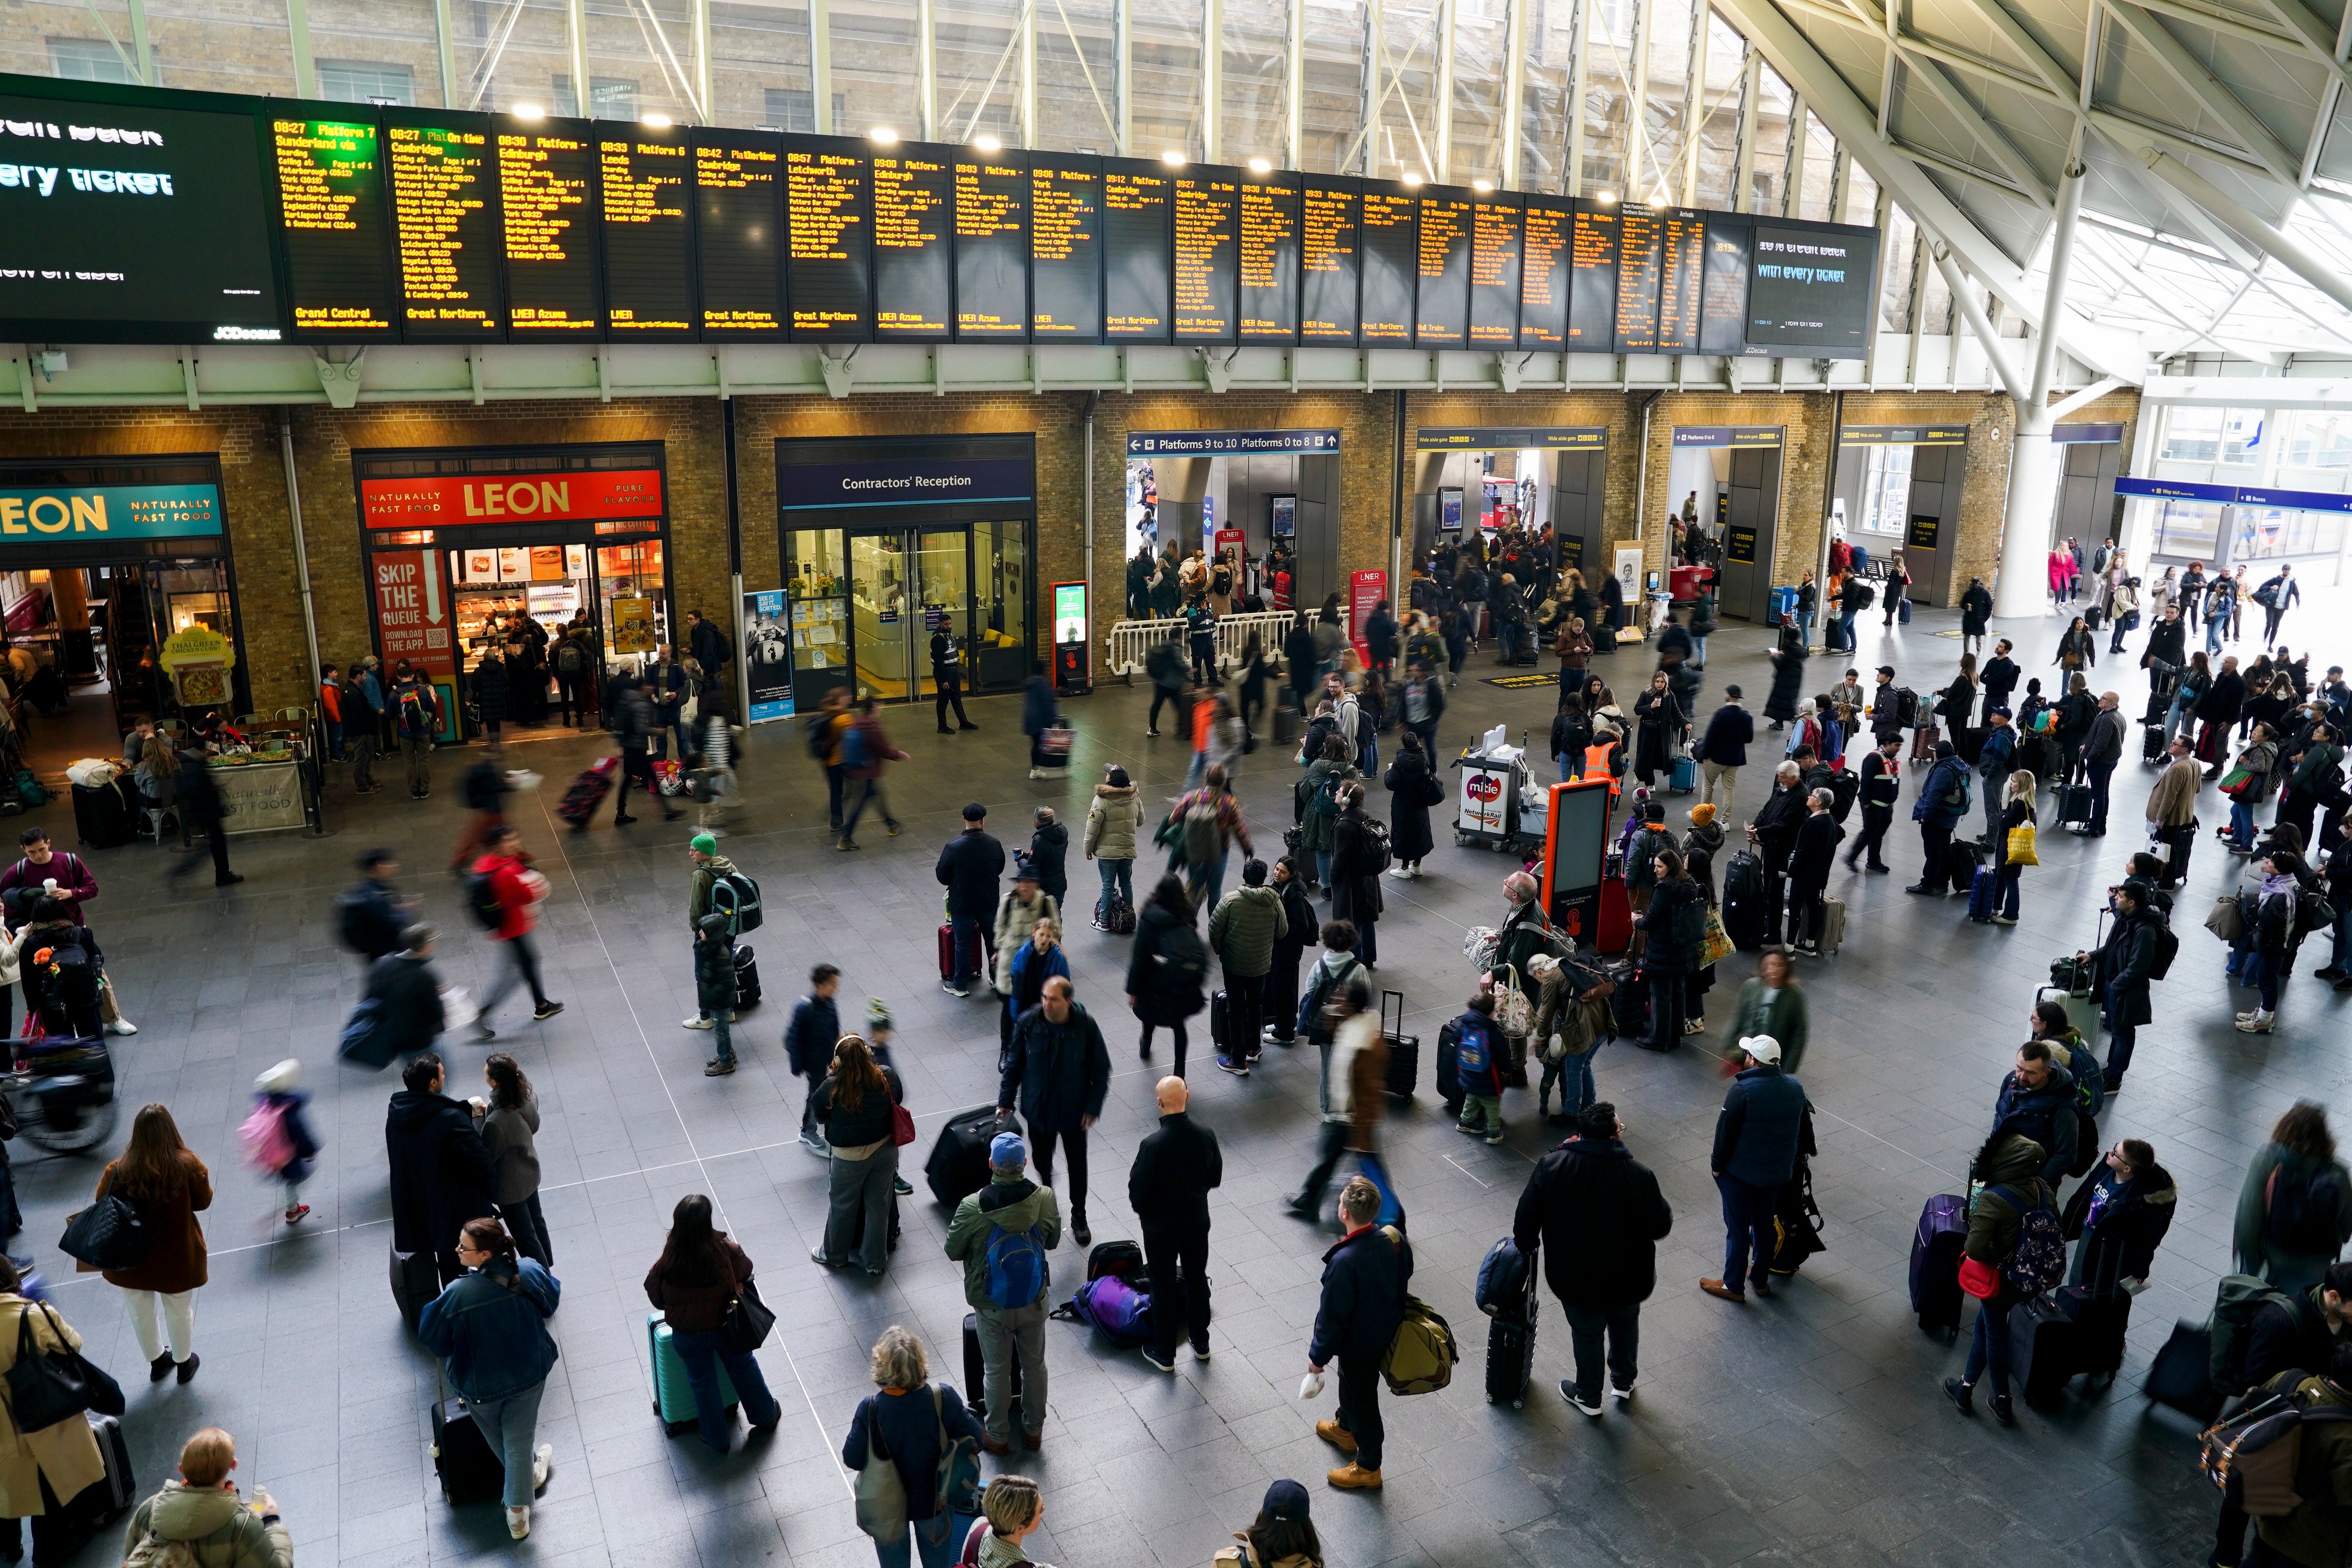 Passengers waiting for trains at London King's Cross Station on Good Friday